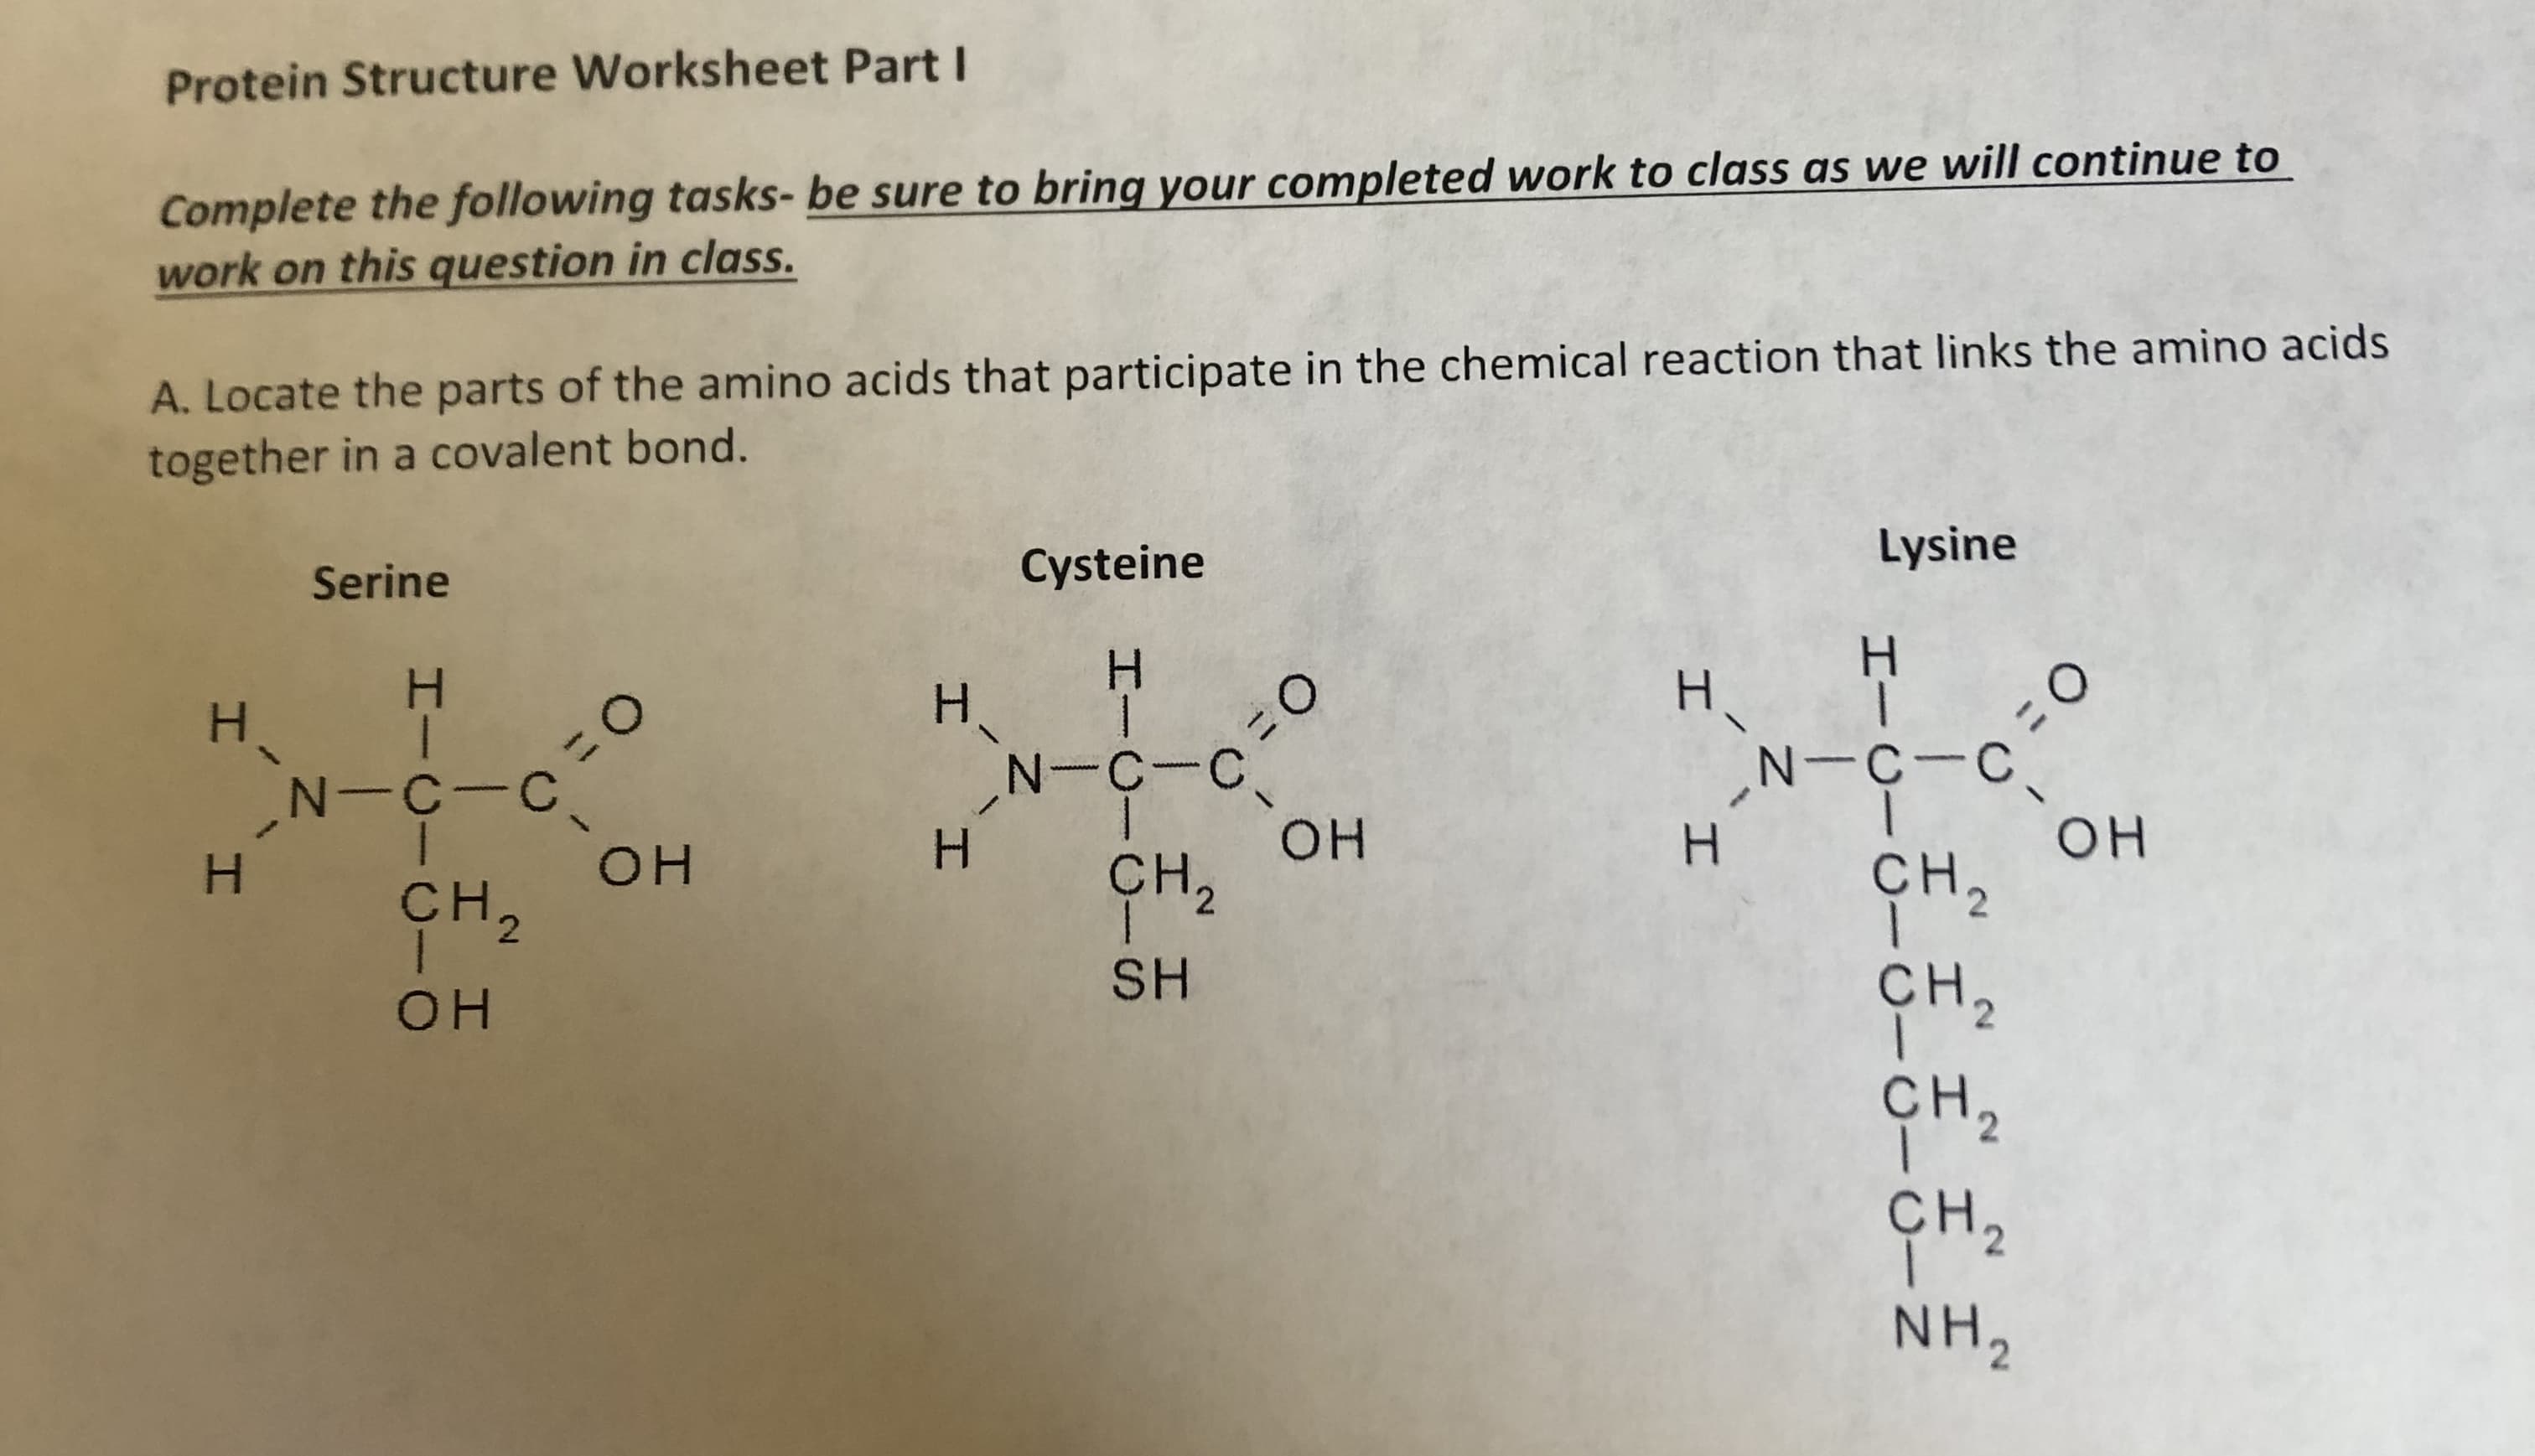 Protein Structure Worksheet PartI
Complete the following tasks- be sure to bring your completed work to class as we will continue to
work on this question in class.
A. Locate the parts of the amino acids that participate in the chemical reaction that links the amino acids
together in a covalent bond.
Lysine
Cysteine
Serine
Н
H.
H
11
N-C-C
он
сн,
=0
N-C-C
I
Н
OH
H
ҫH, Он
Cн,
2
2
SH
ҫн,
OH
сн,
ҫн,
NH2
2
2
I I
- C- N
I-C-CIC-
I
I
O-
I
I
/\
